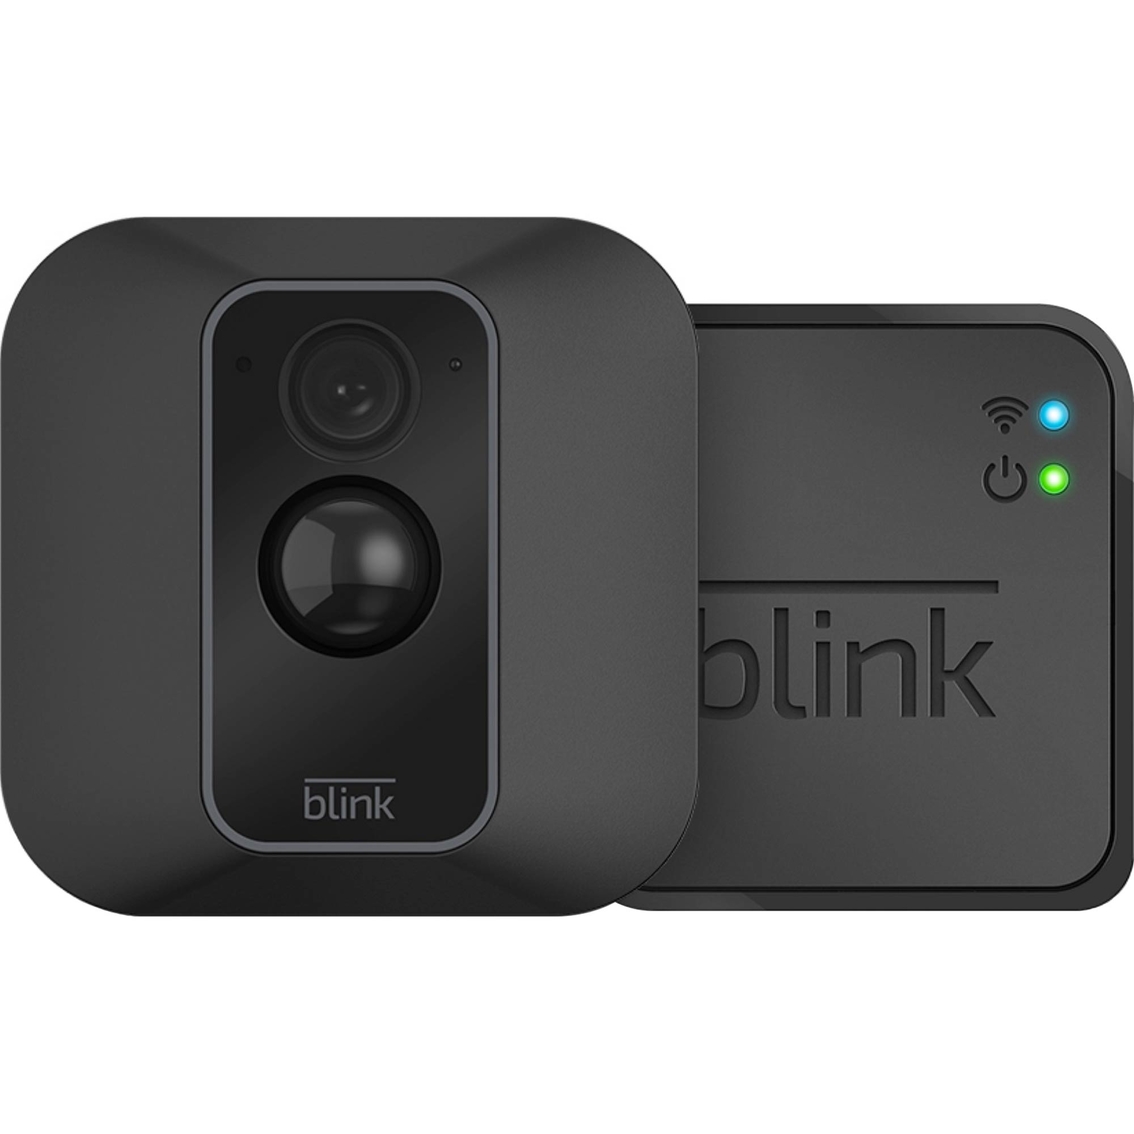 blink camera new features